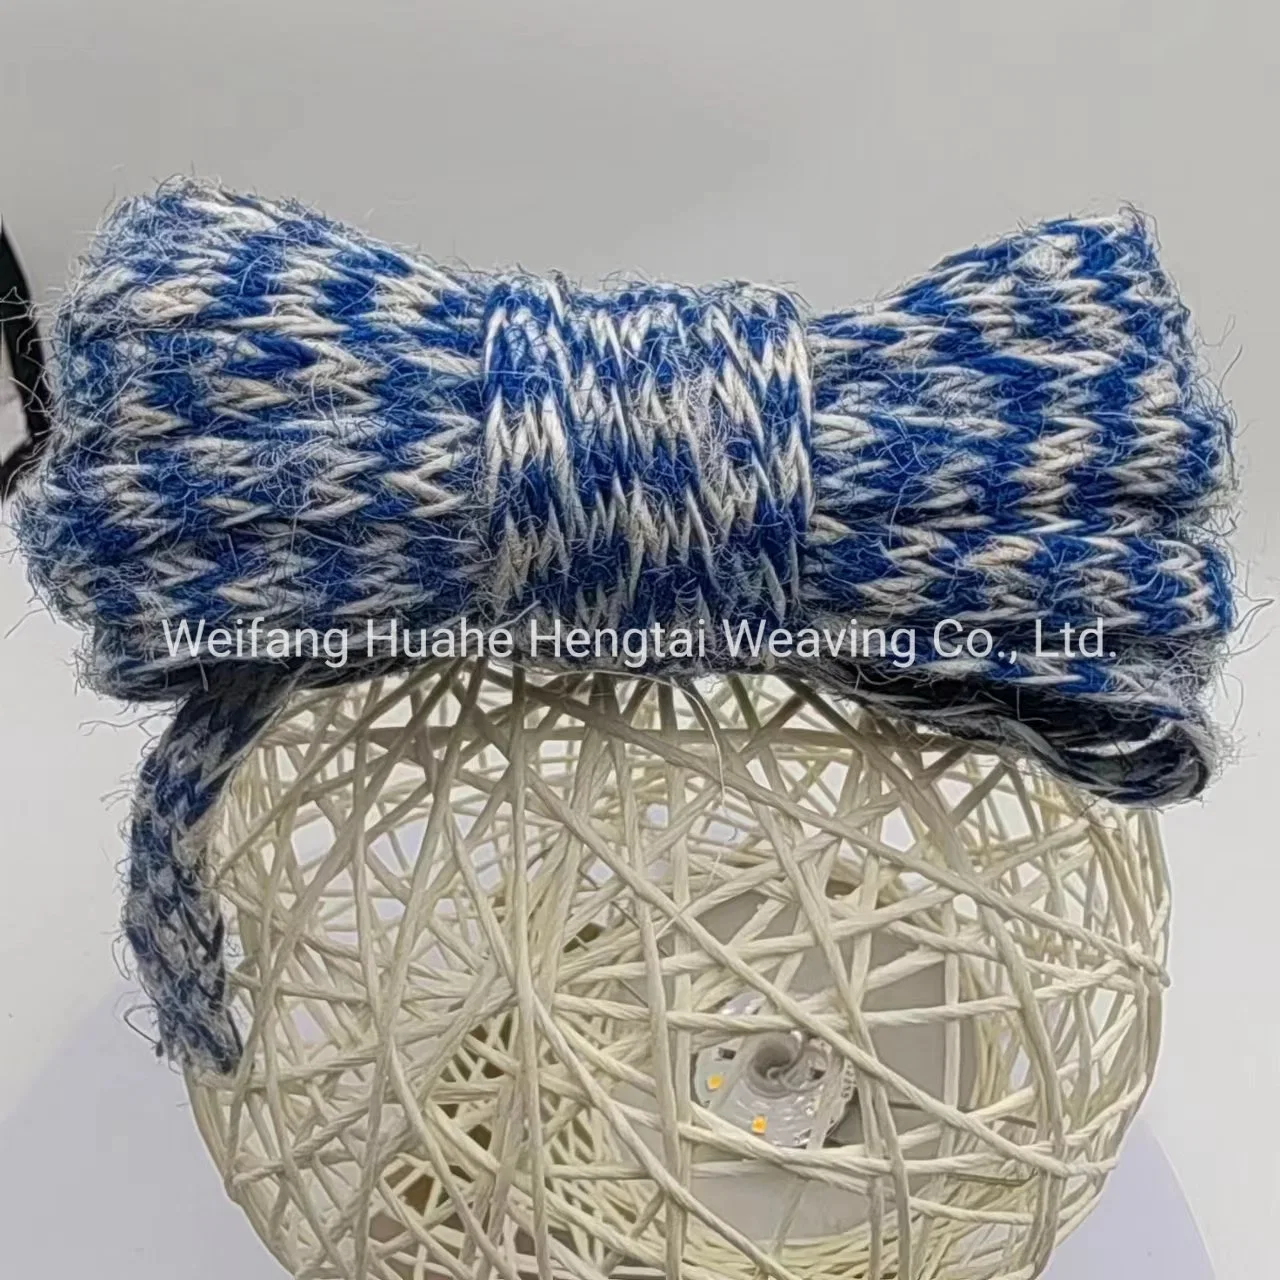 Wholesale/Supplier of Cross-Border New Products, Colored Braided Gift Packaging